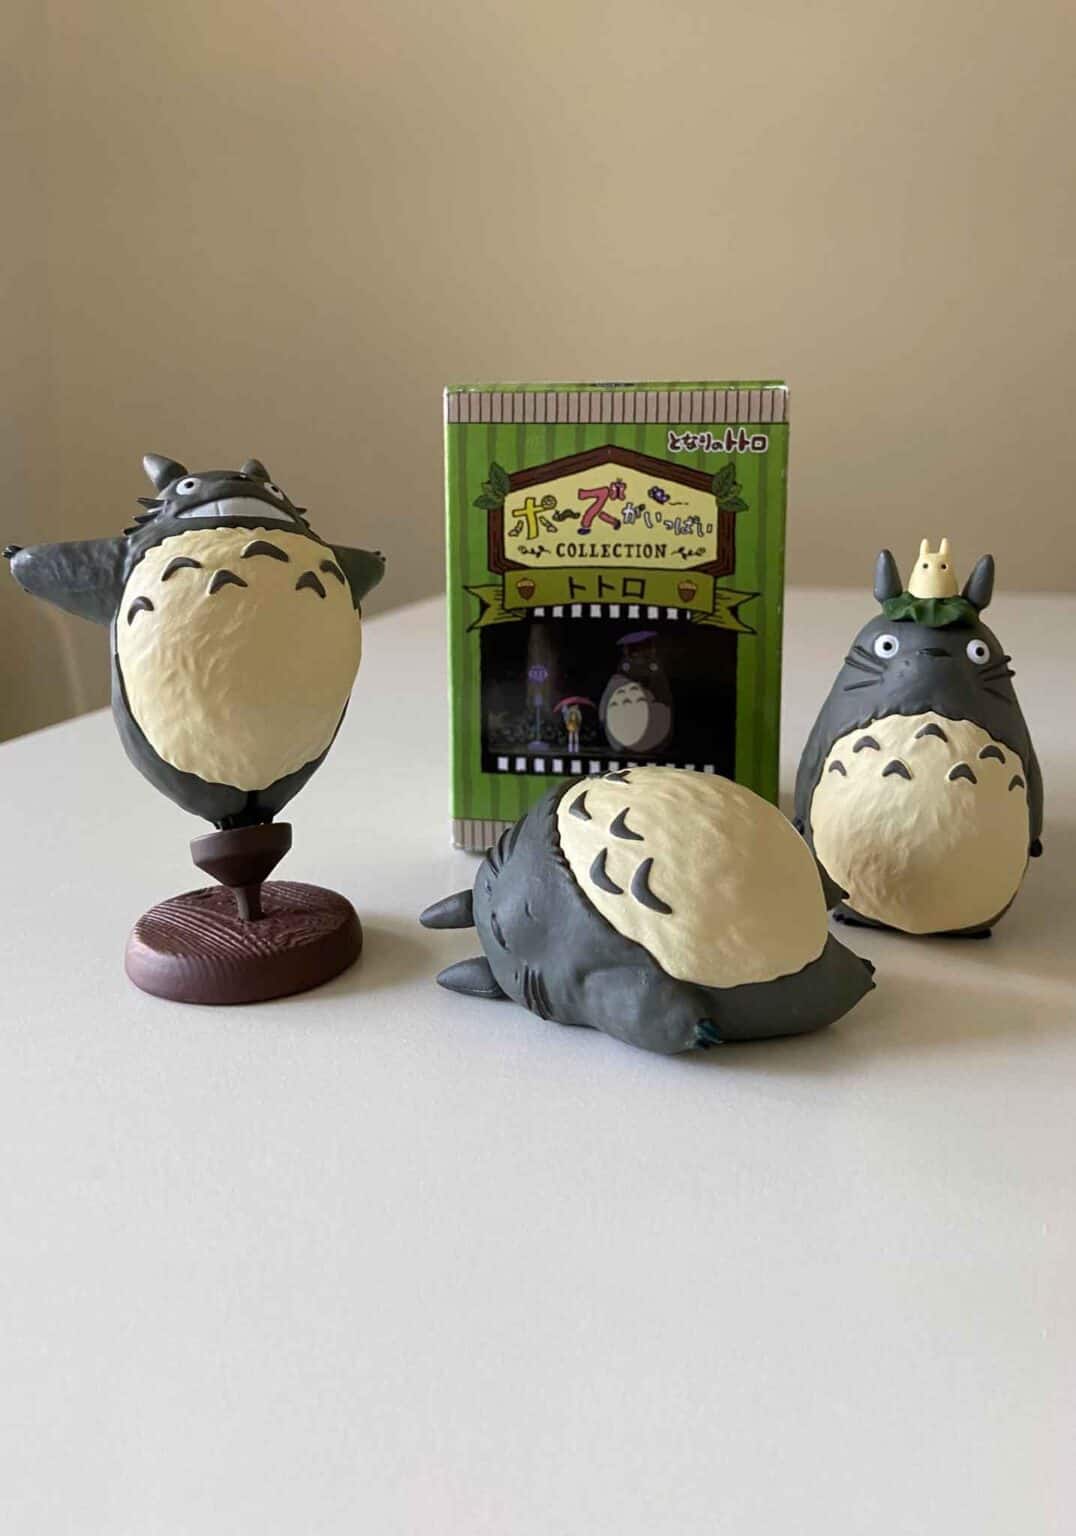 Collection Mei 1 Blind figurine - My Neighbour Totoro